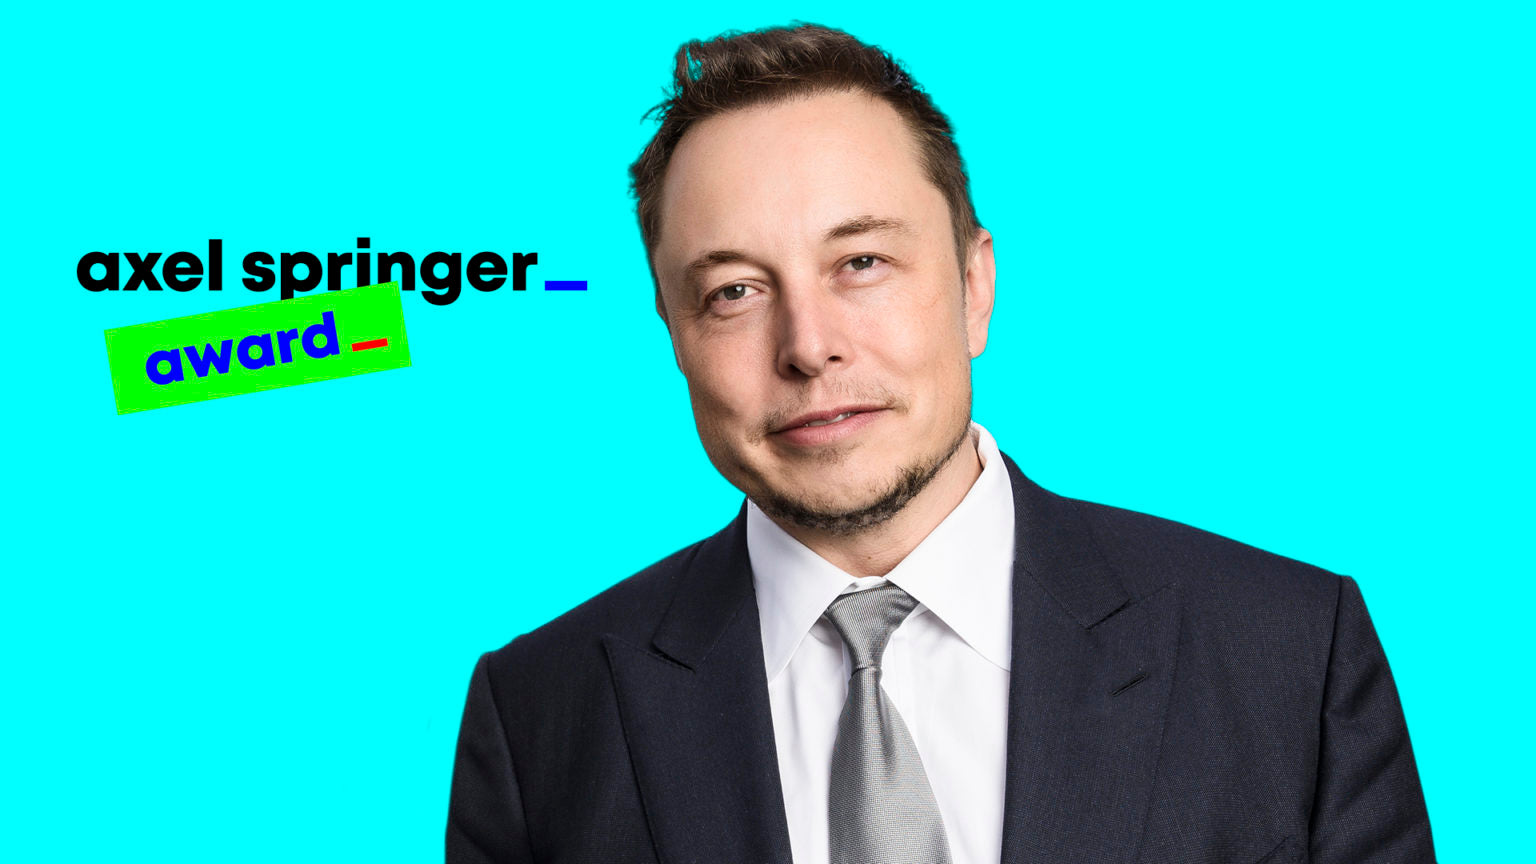 Tesla & SpaceX CEO Elon Musk Honored with The Axel Springer Award: "Great Visions & the Indomitable Will to Achieve Them"